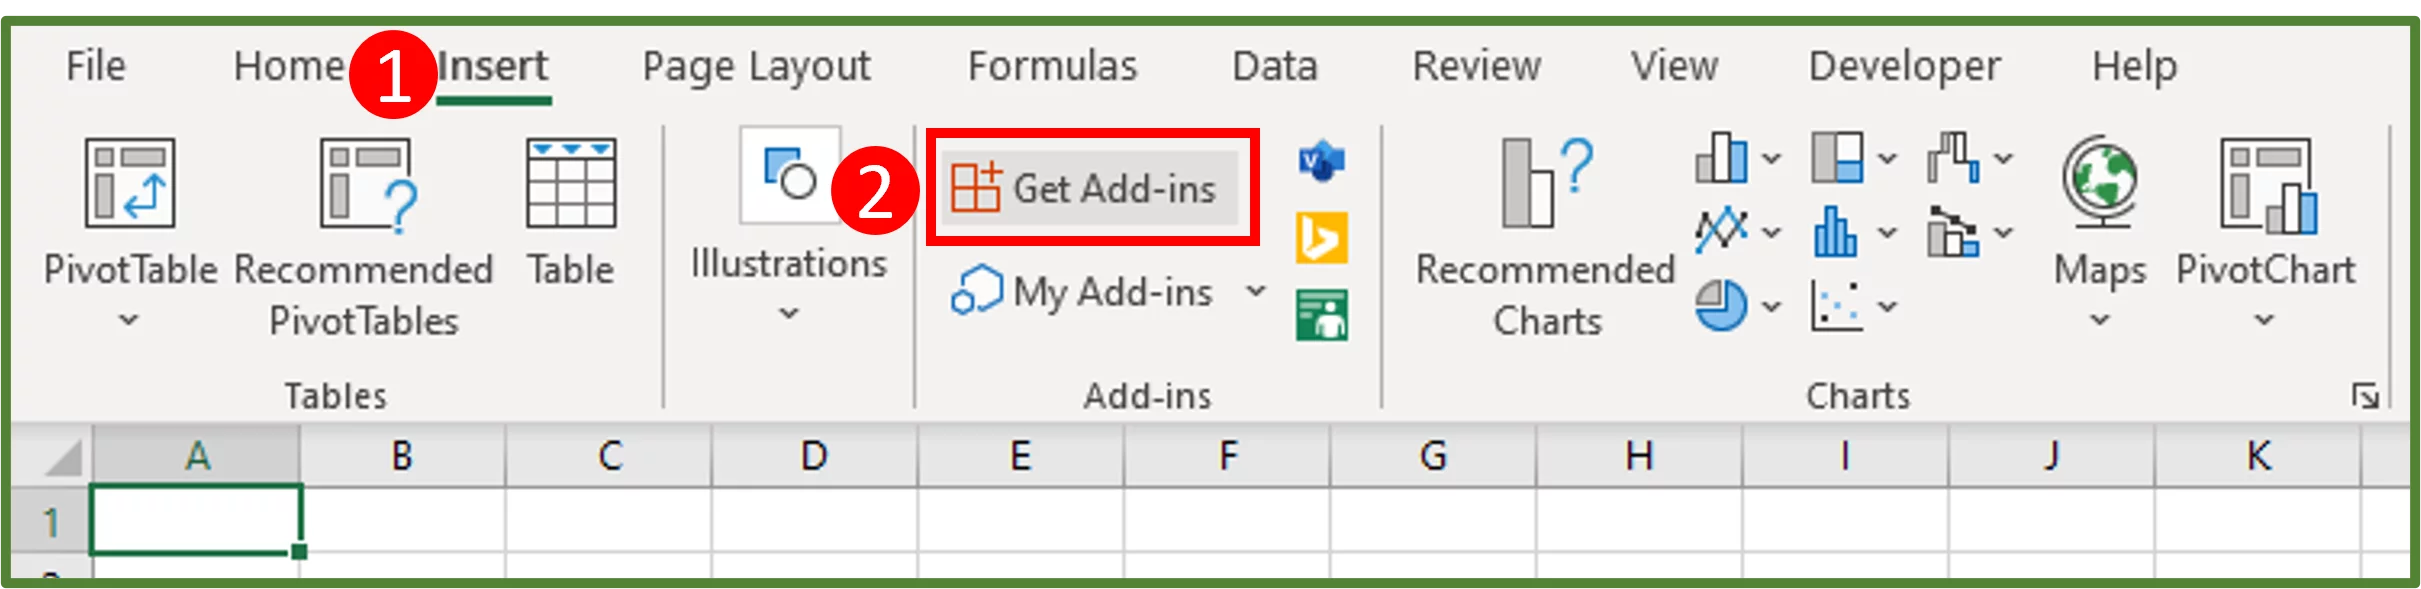 Screenshot showing the Get Add-ins option in the Add-ins group highlighted.